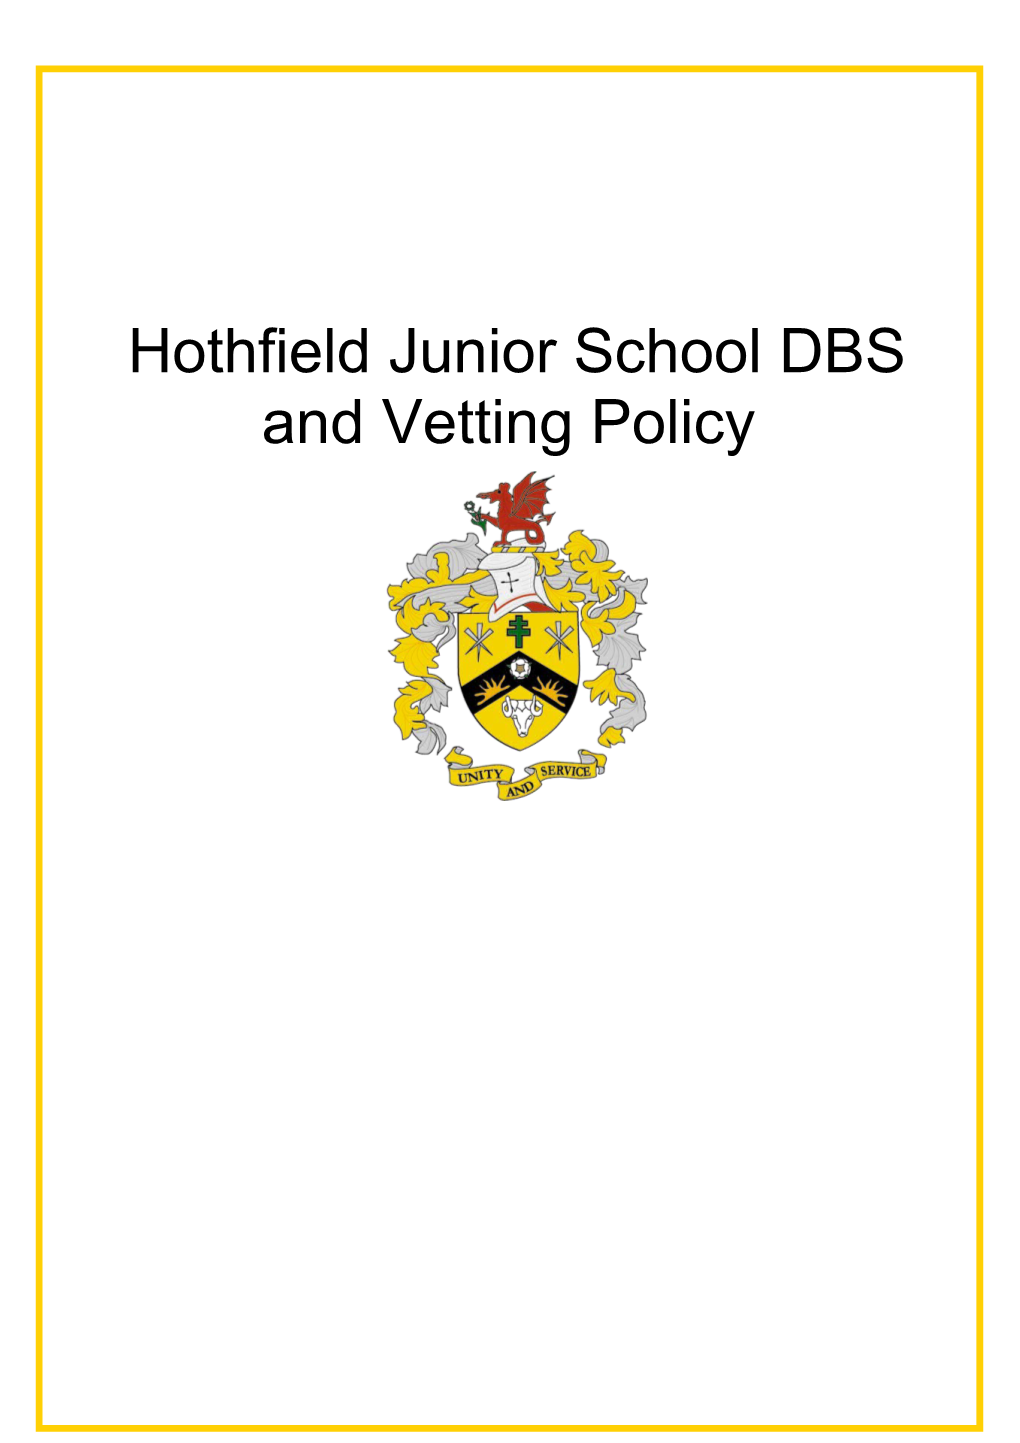 DBS and Vetting Policy